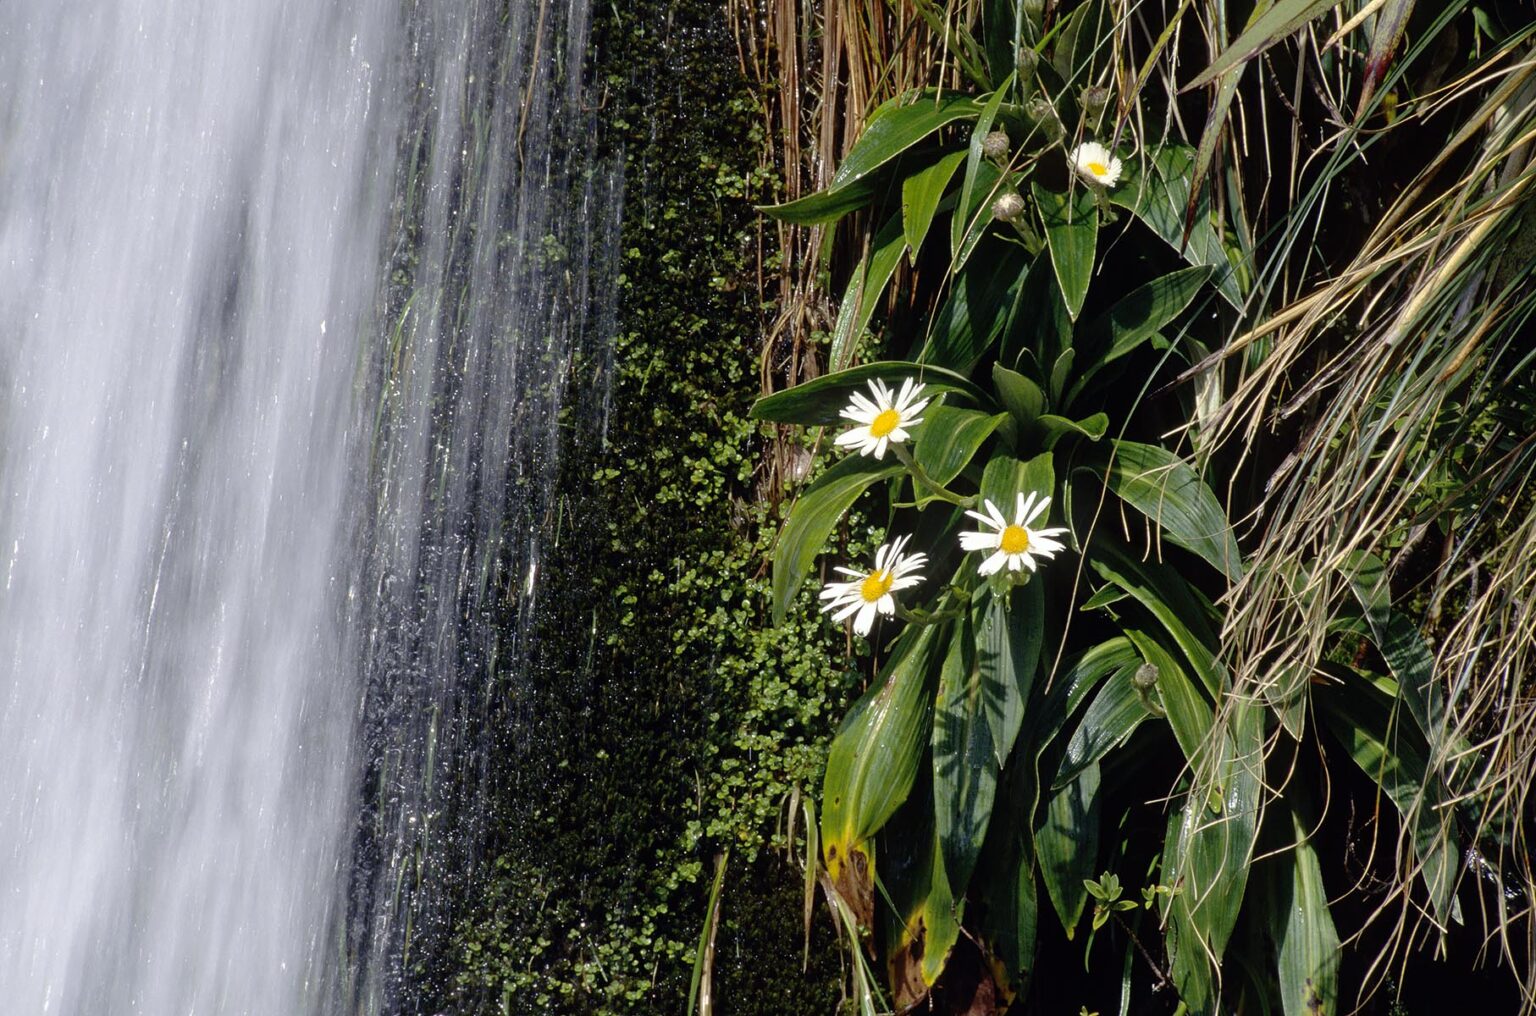 MOUNTAIN DAISIES grow next to a waterfall along the ROUTEBURN TRACK - FIORDLAND NATIONAL PARK